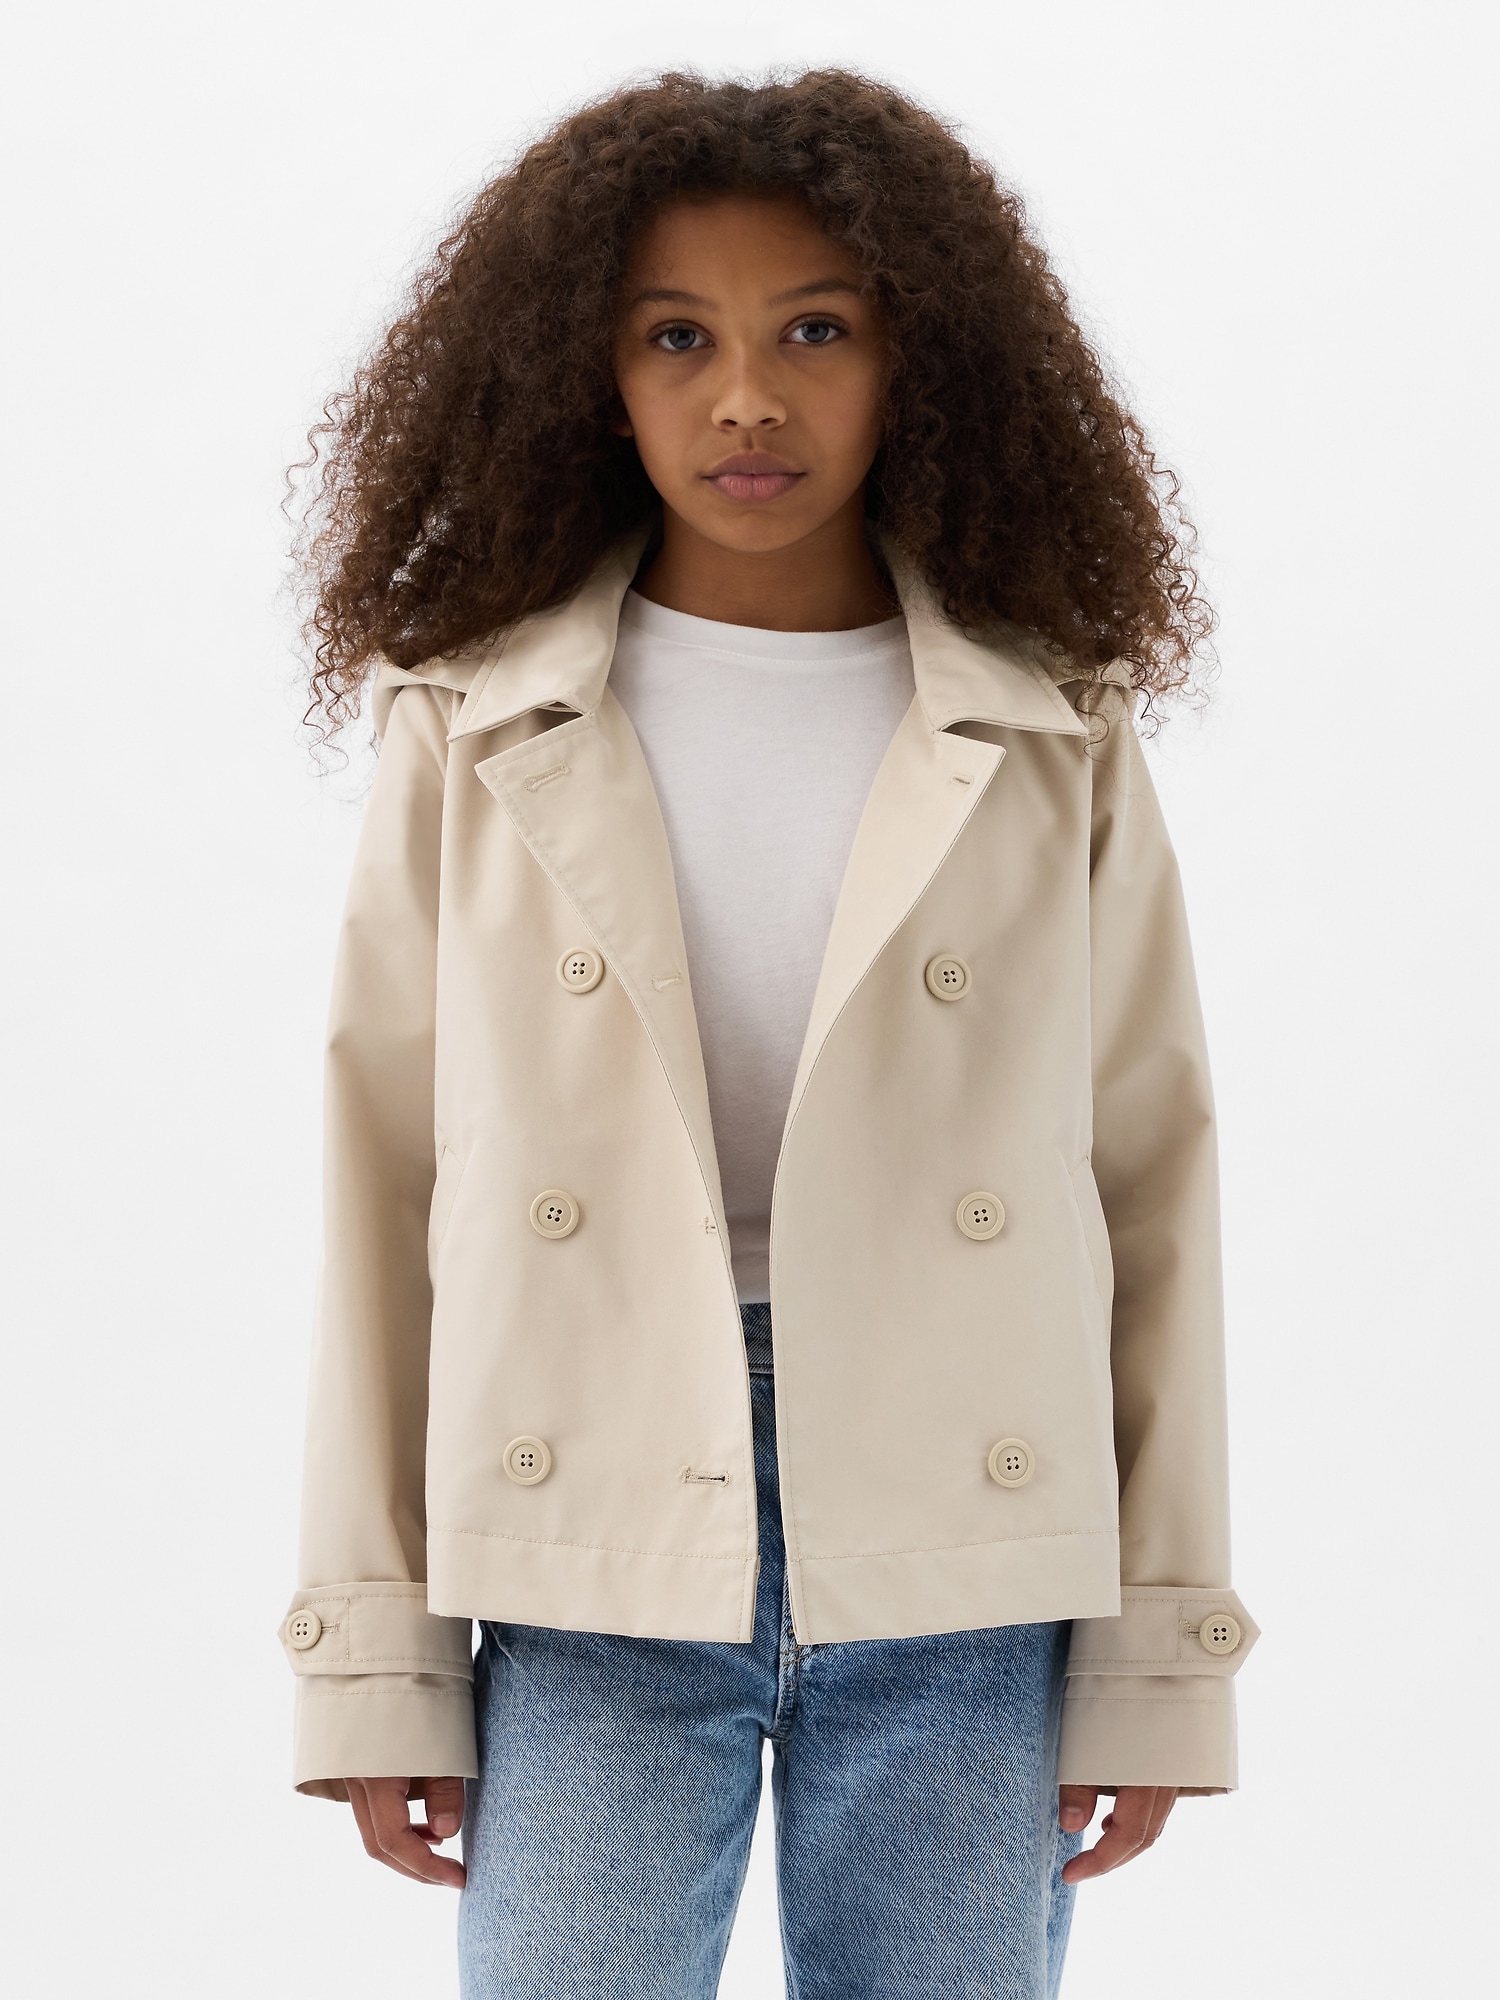 Kids Cropped Trench Coat | Gap